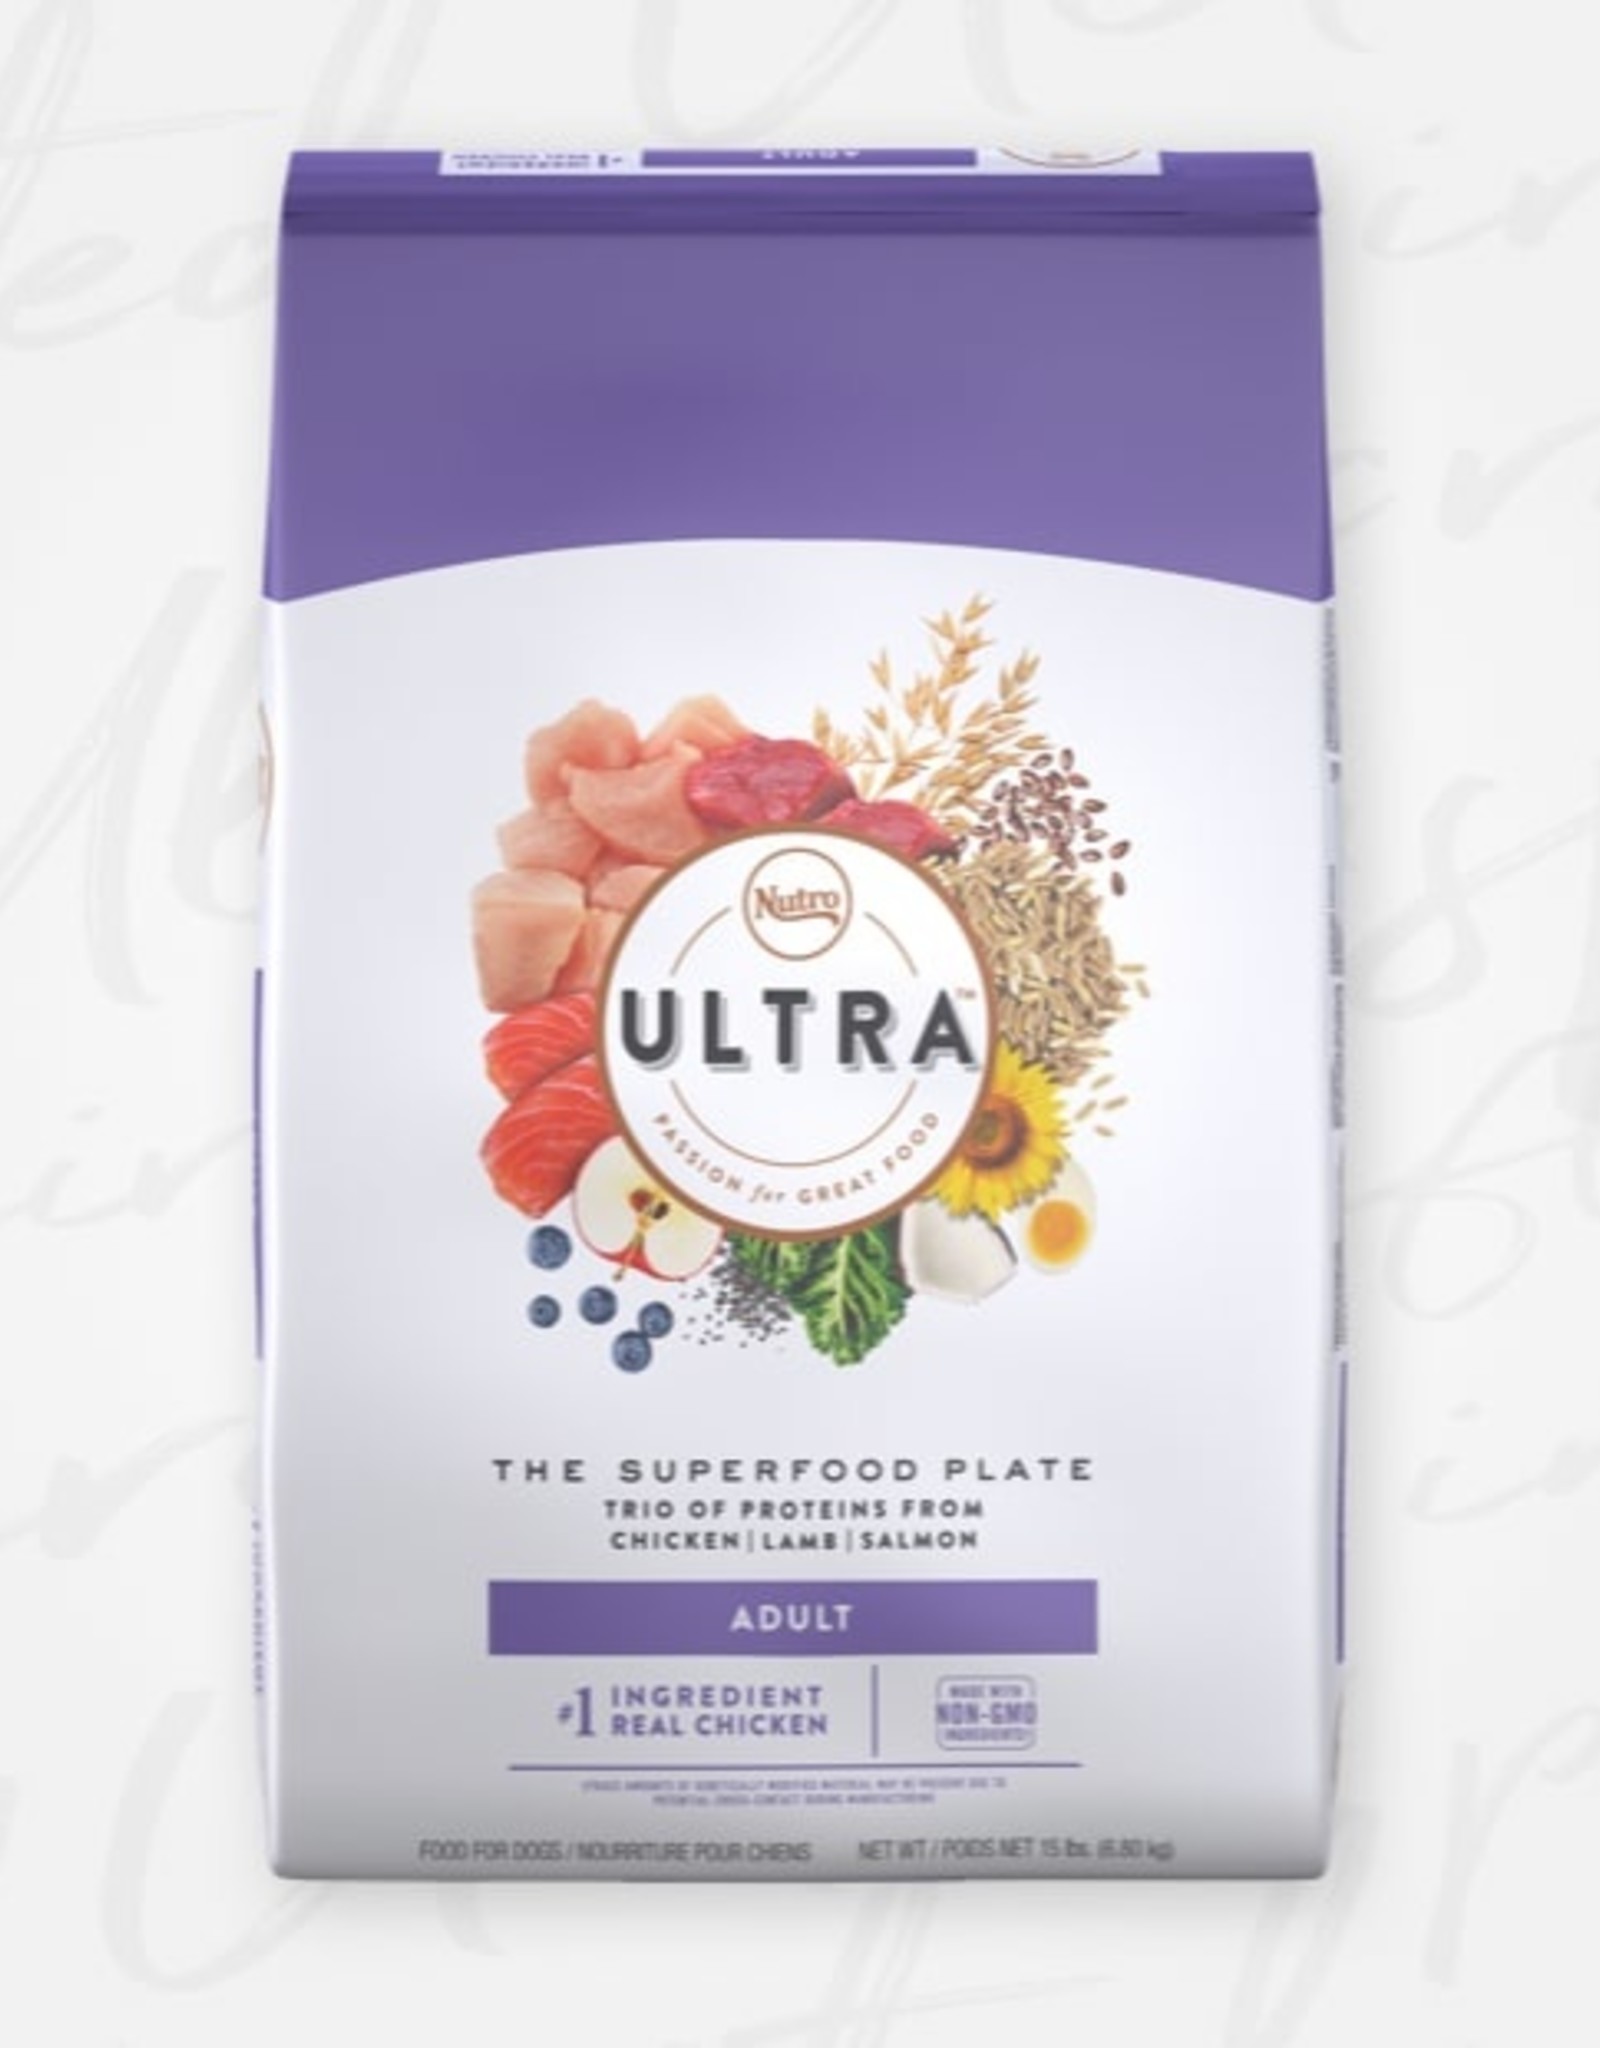 NUTRO PRODUCTS  INC. NUTRO ULTRA ADULT 30LBS